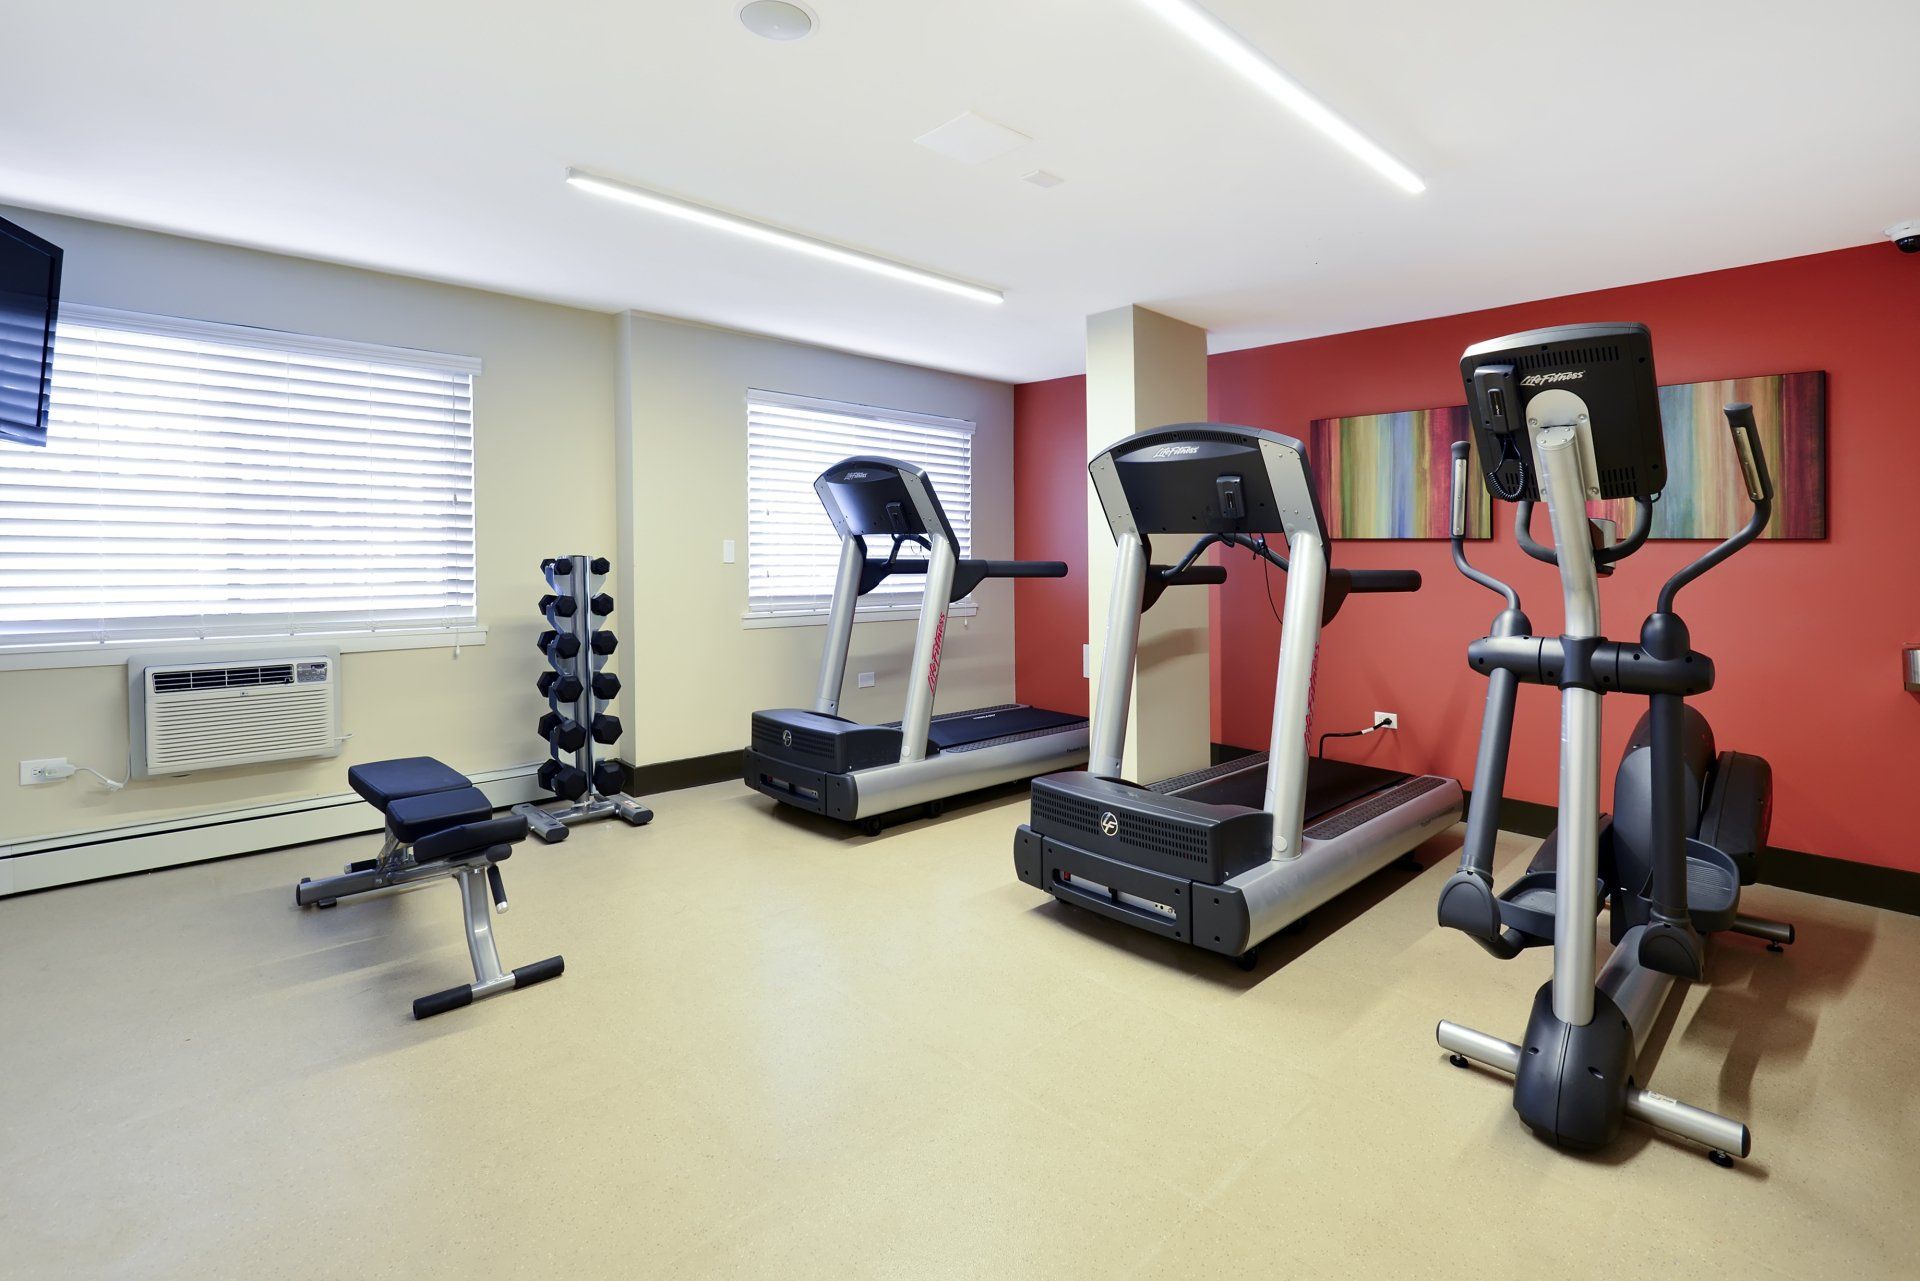 A gym with treadmills , ellipticals and a bench at Reside on Stratford.